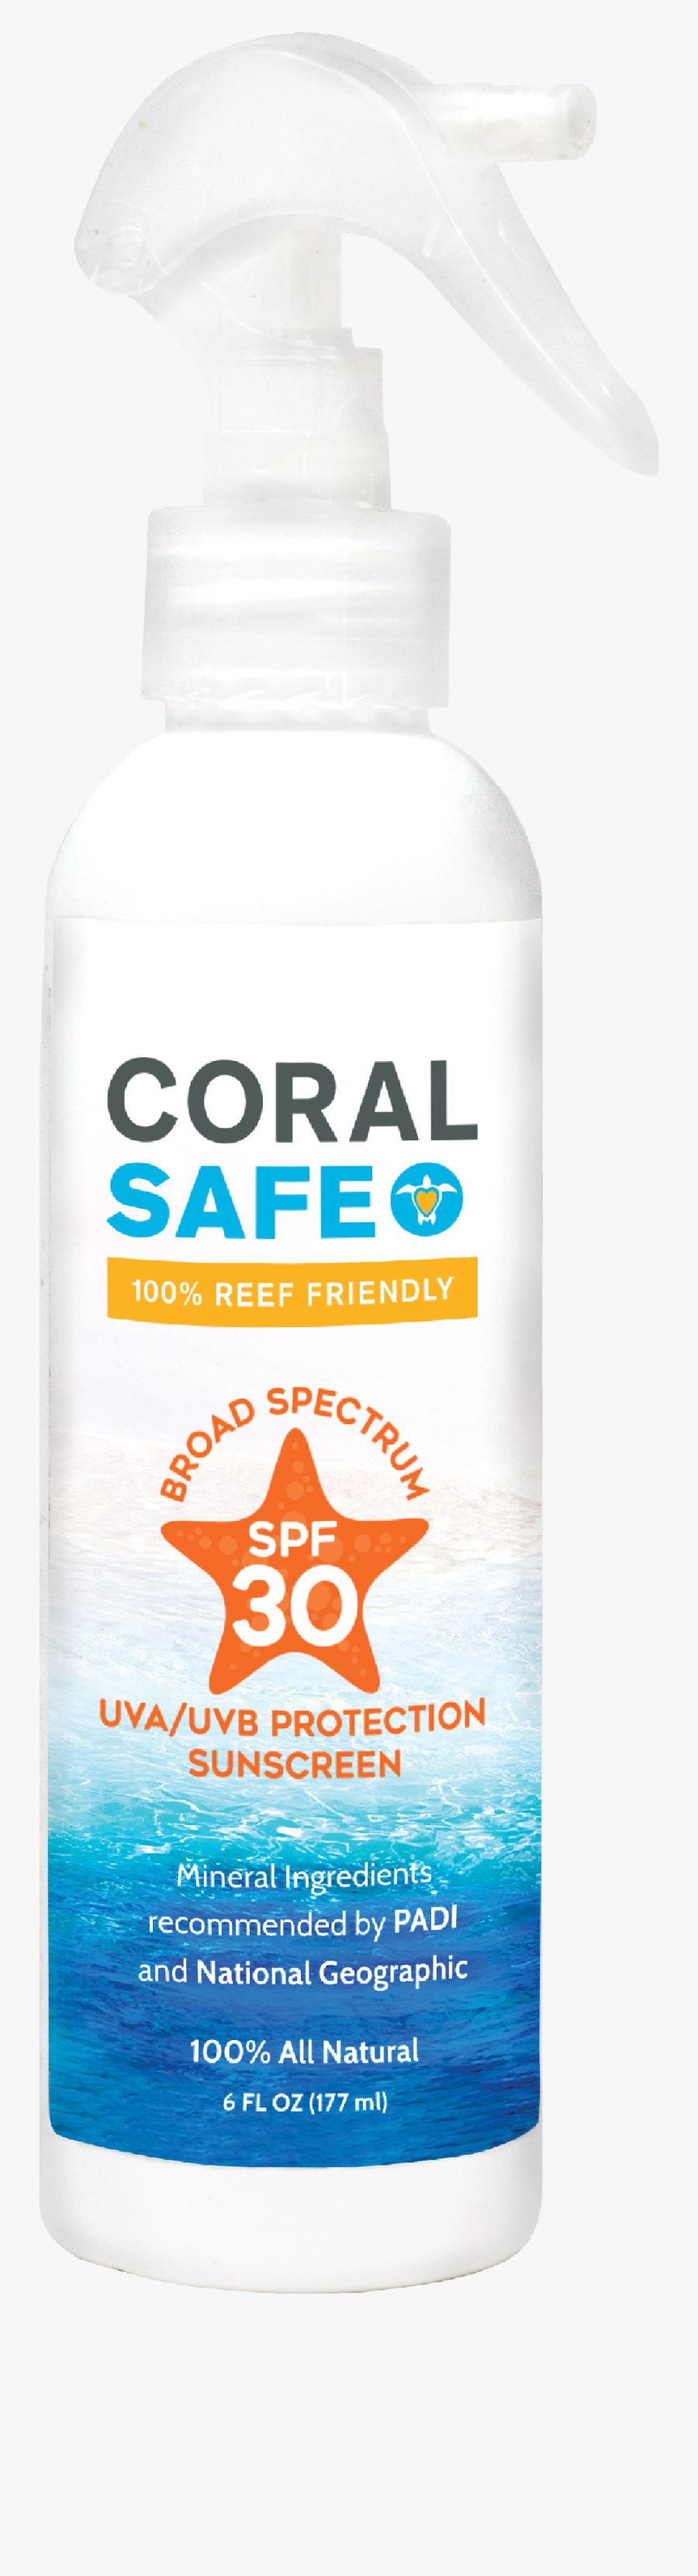 Coral Safe Spf 30 Spray Sunscreen Lotion - Bottle, Transparent Clipart